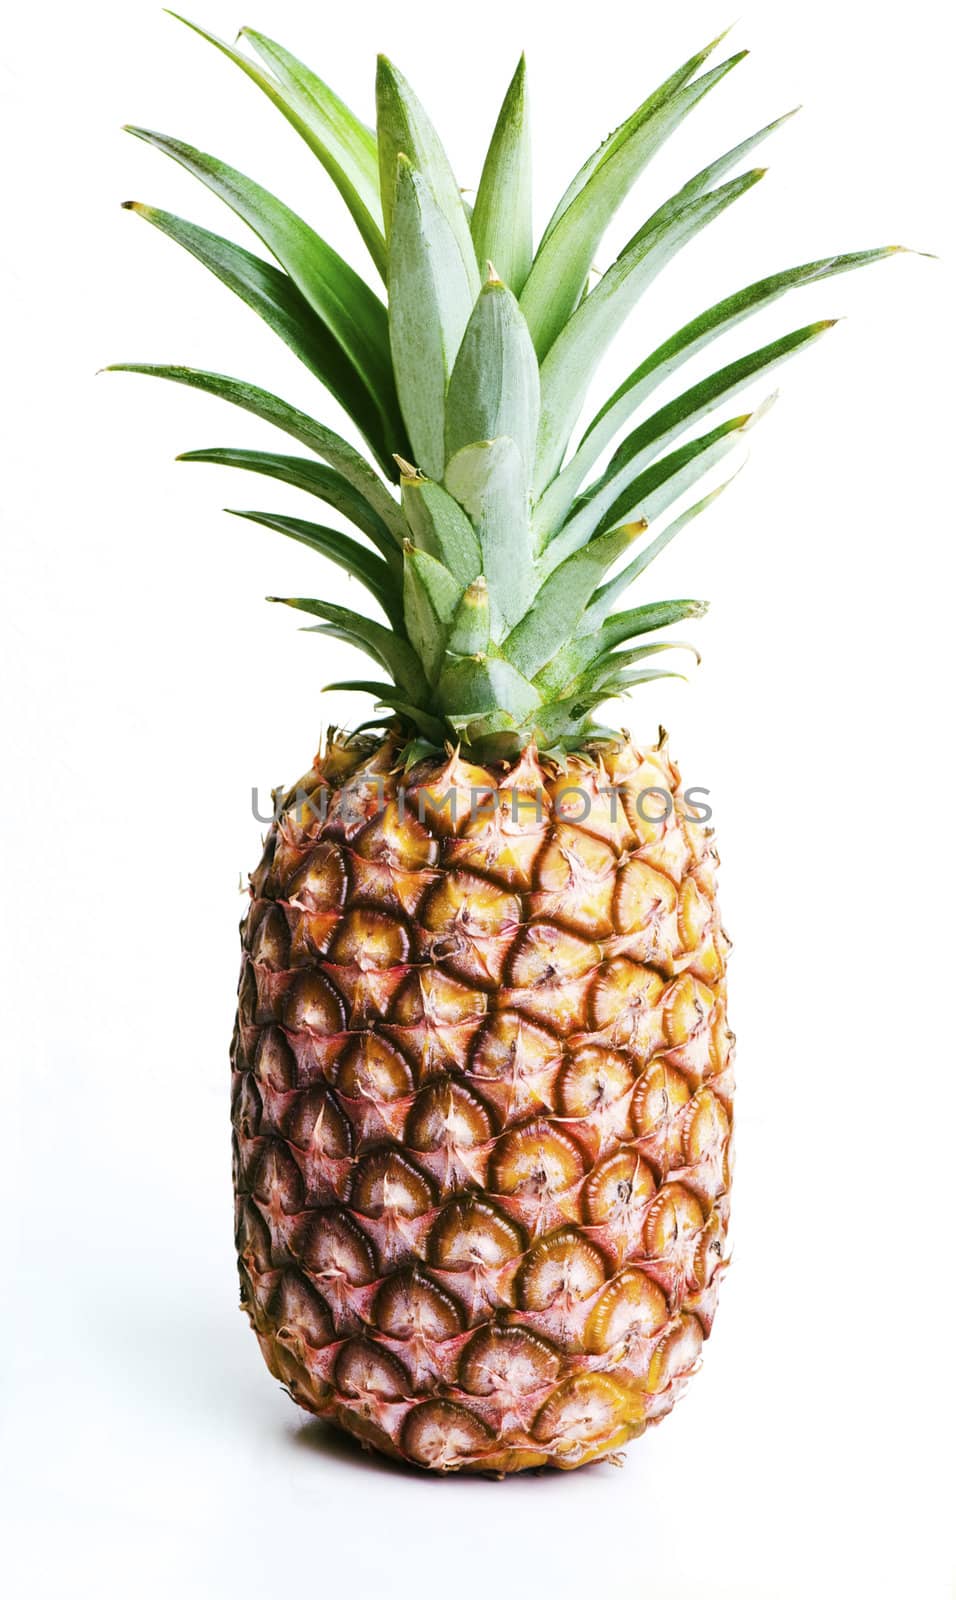 A single pineapple, isolated on white.